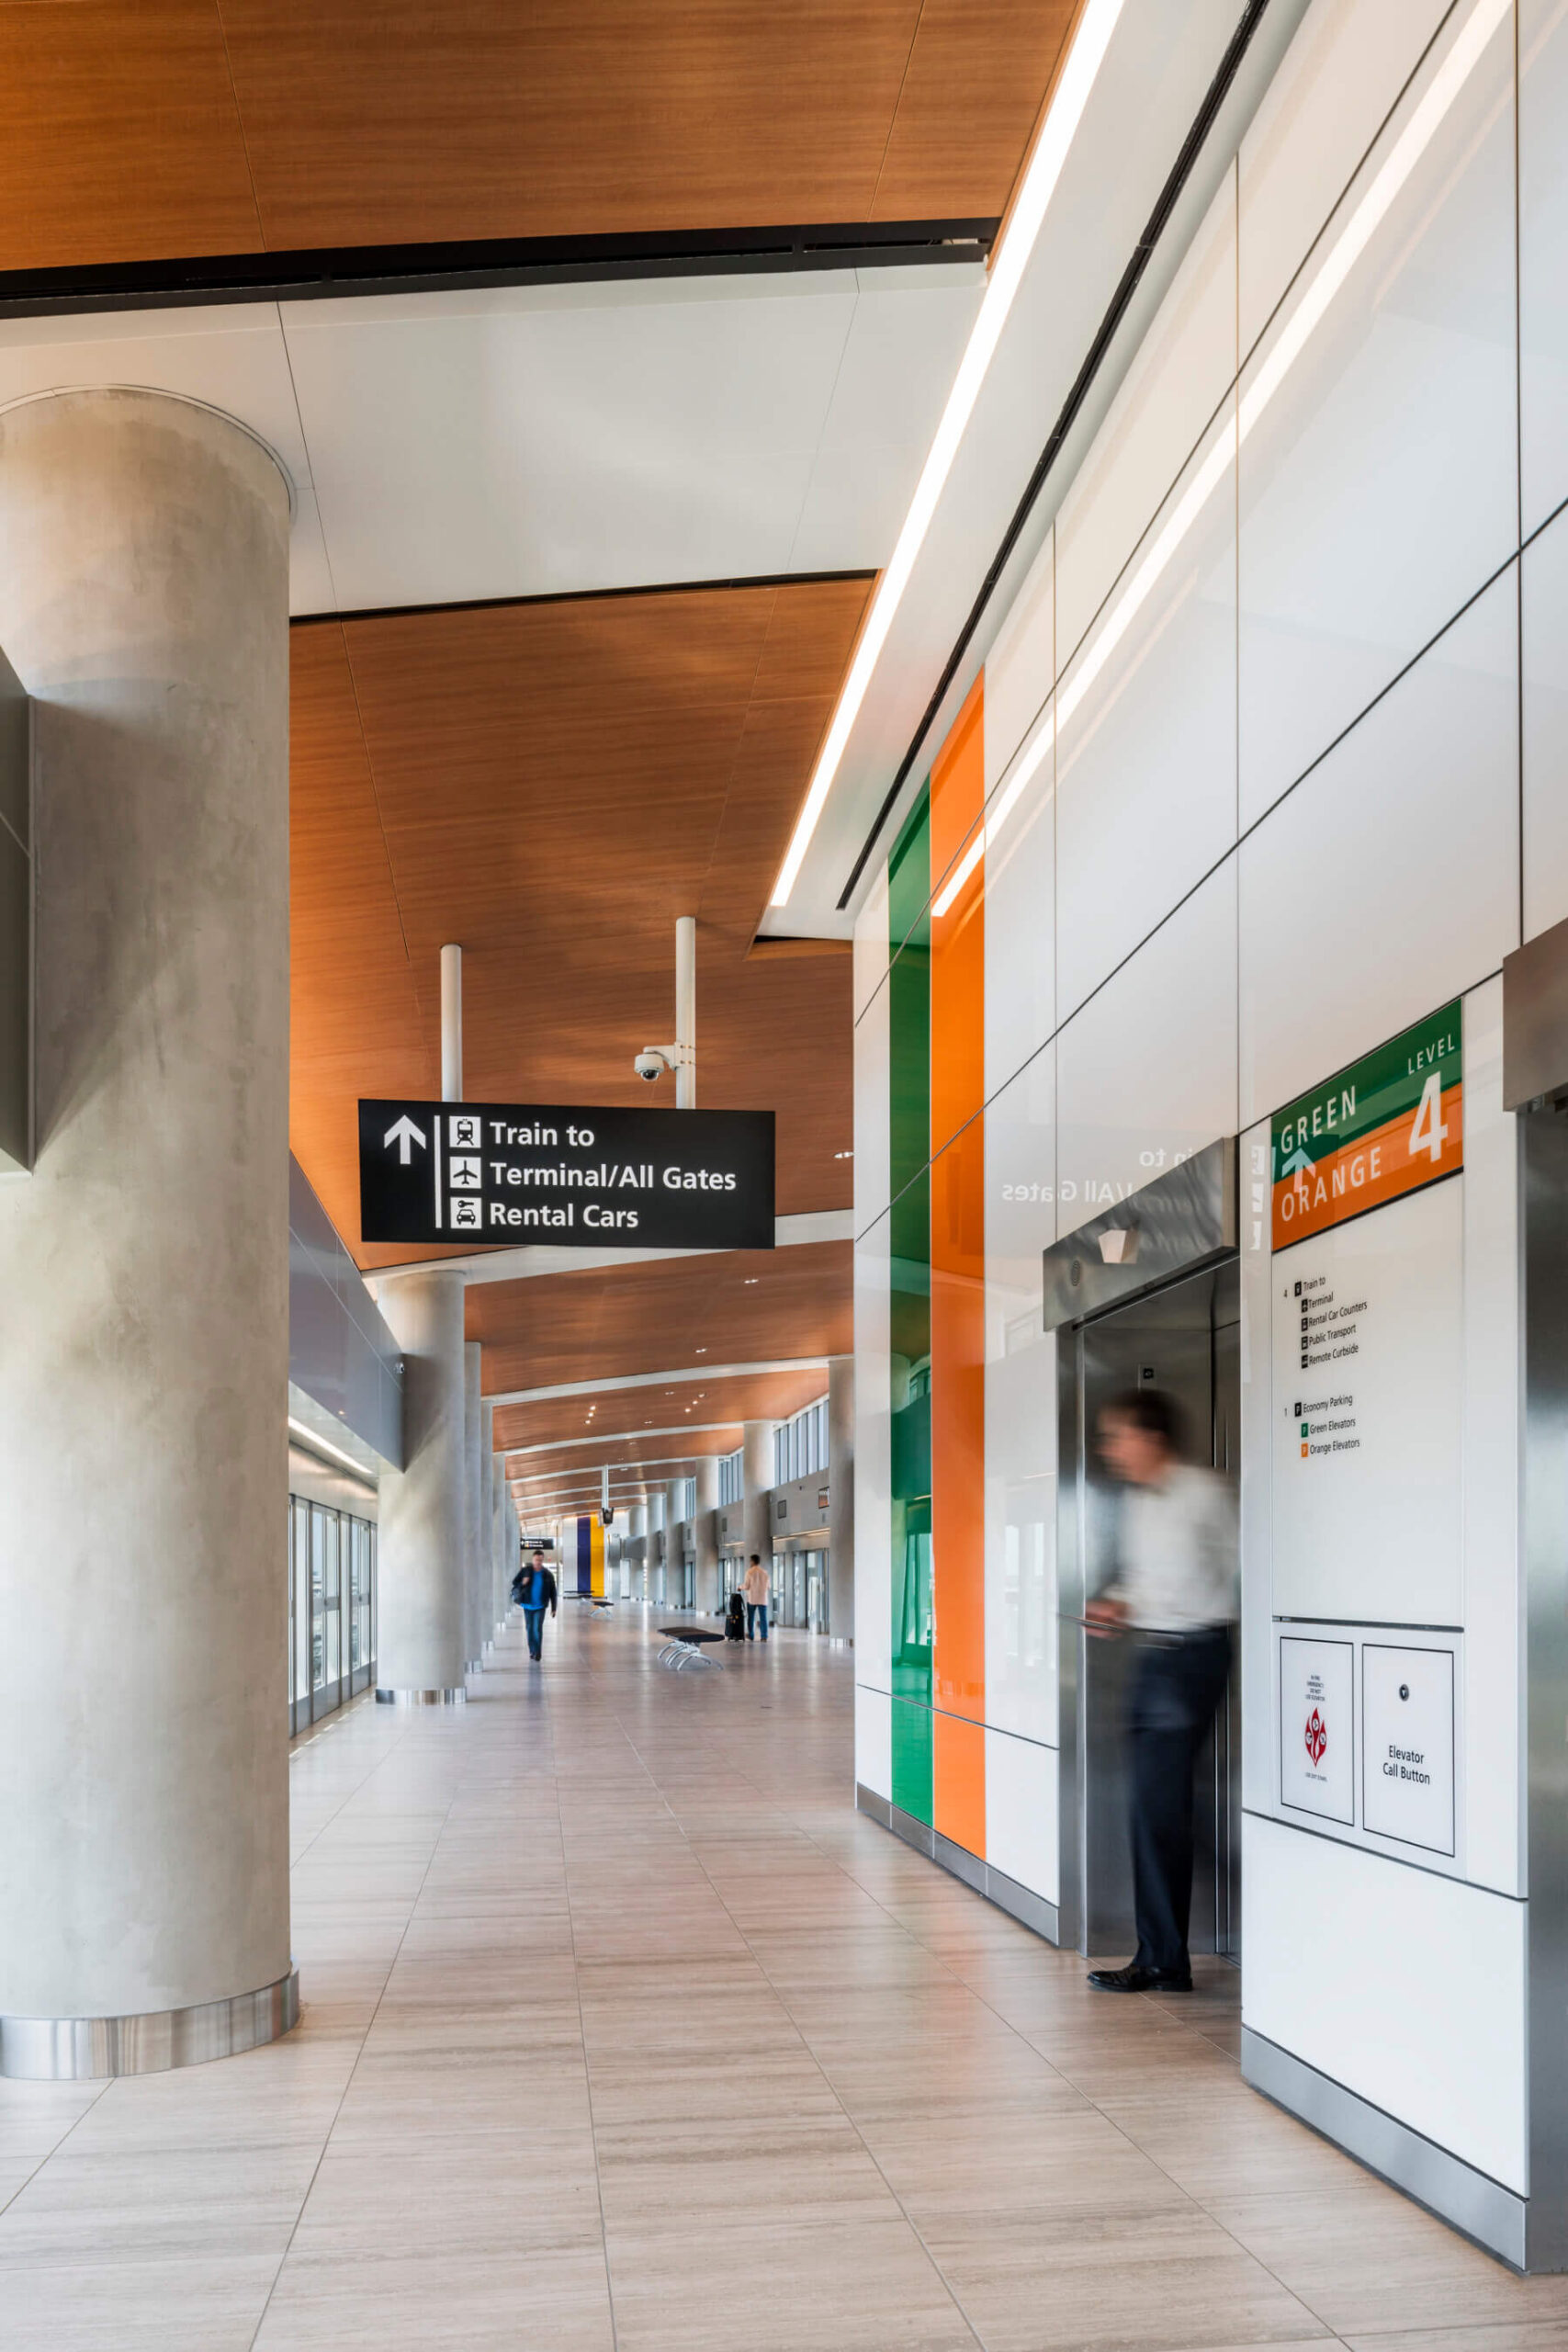 wayfinding signage in the automated people mover station at Tampa International Airport